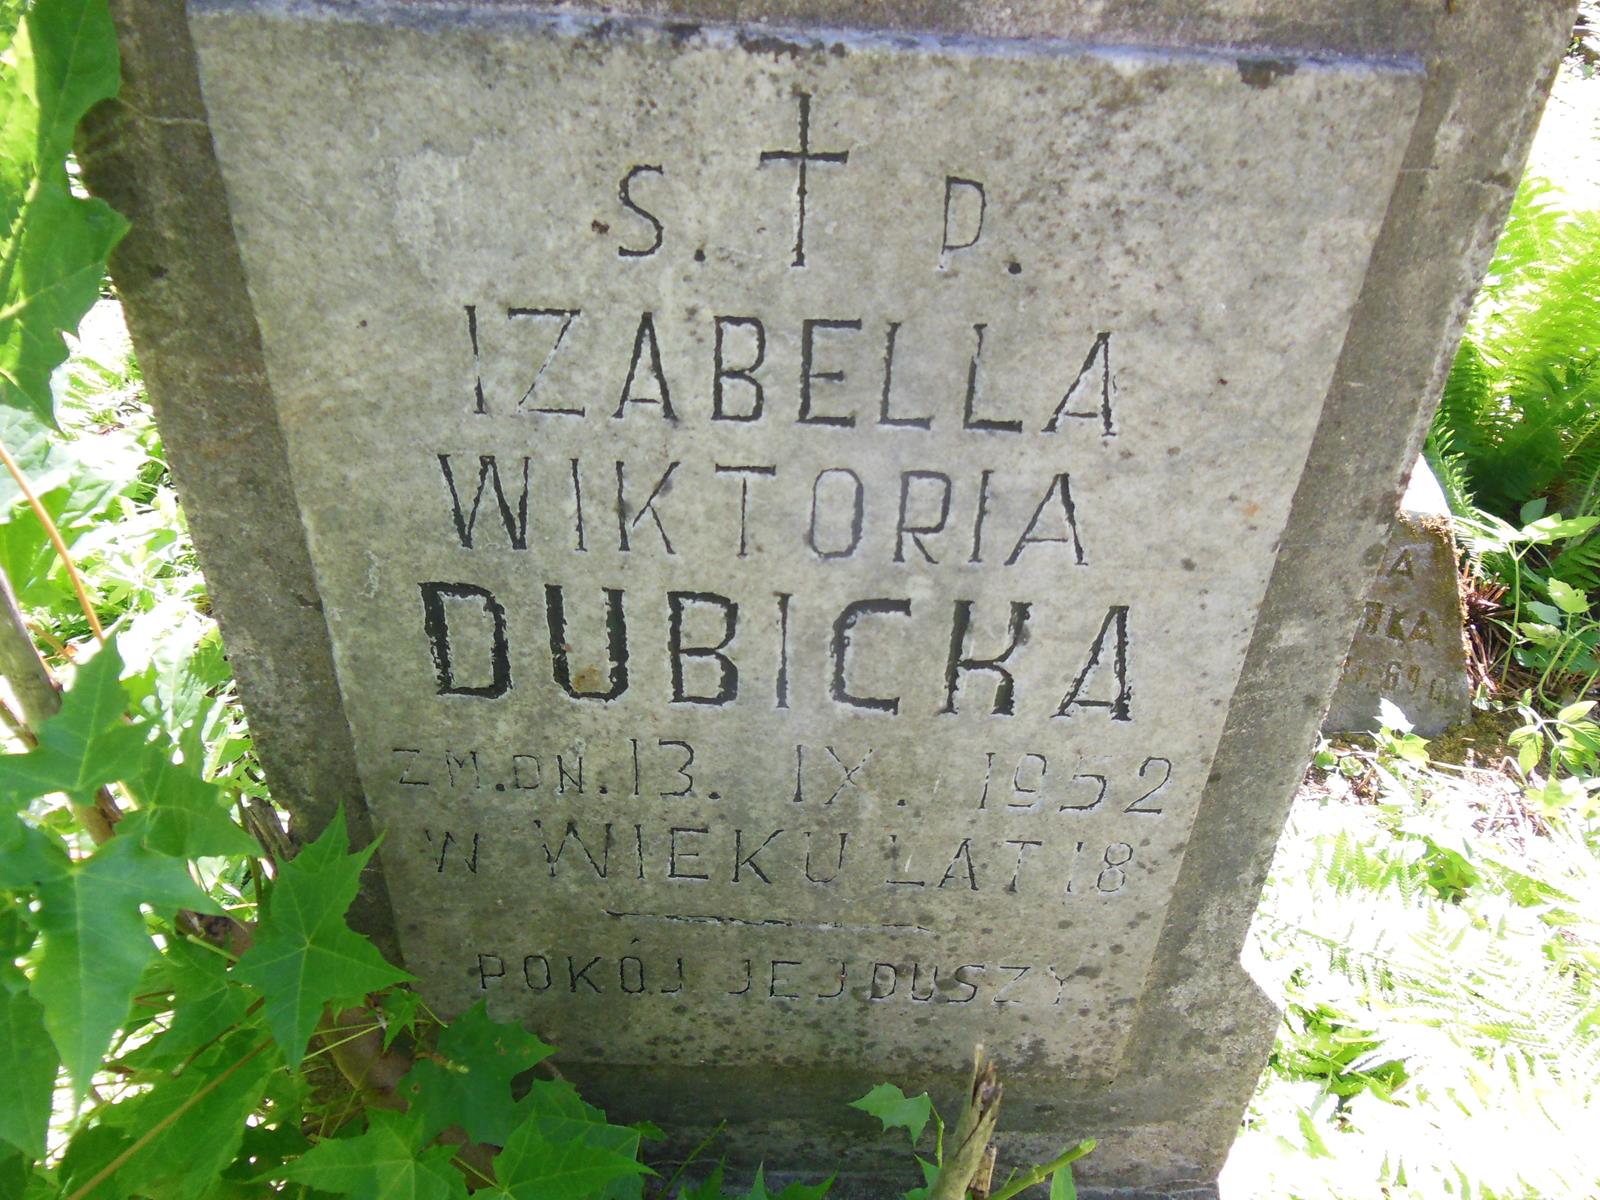 Tombstone of Izabela Dubicka, Ross Cemetery in Vilnius, as of 2013.